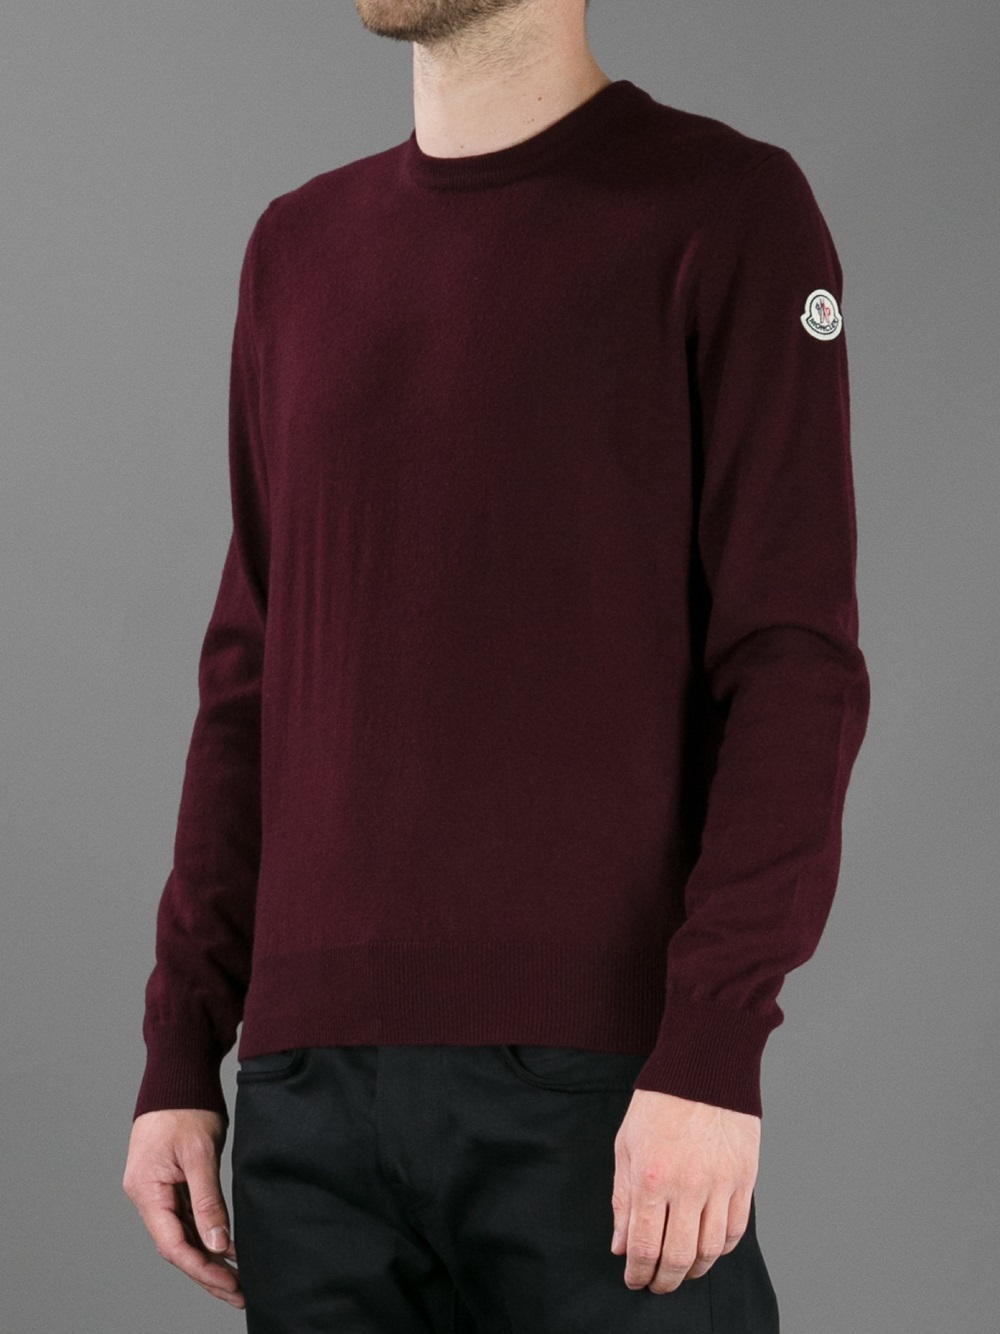 Moncler Classic Crew Neck Sweater in Burgundy (Brown) for Men - Lyst